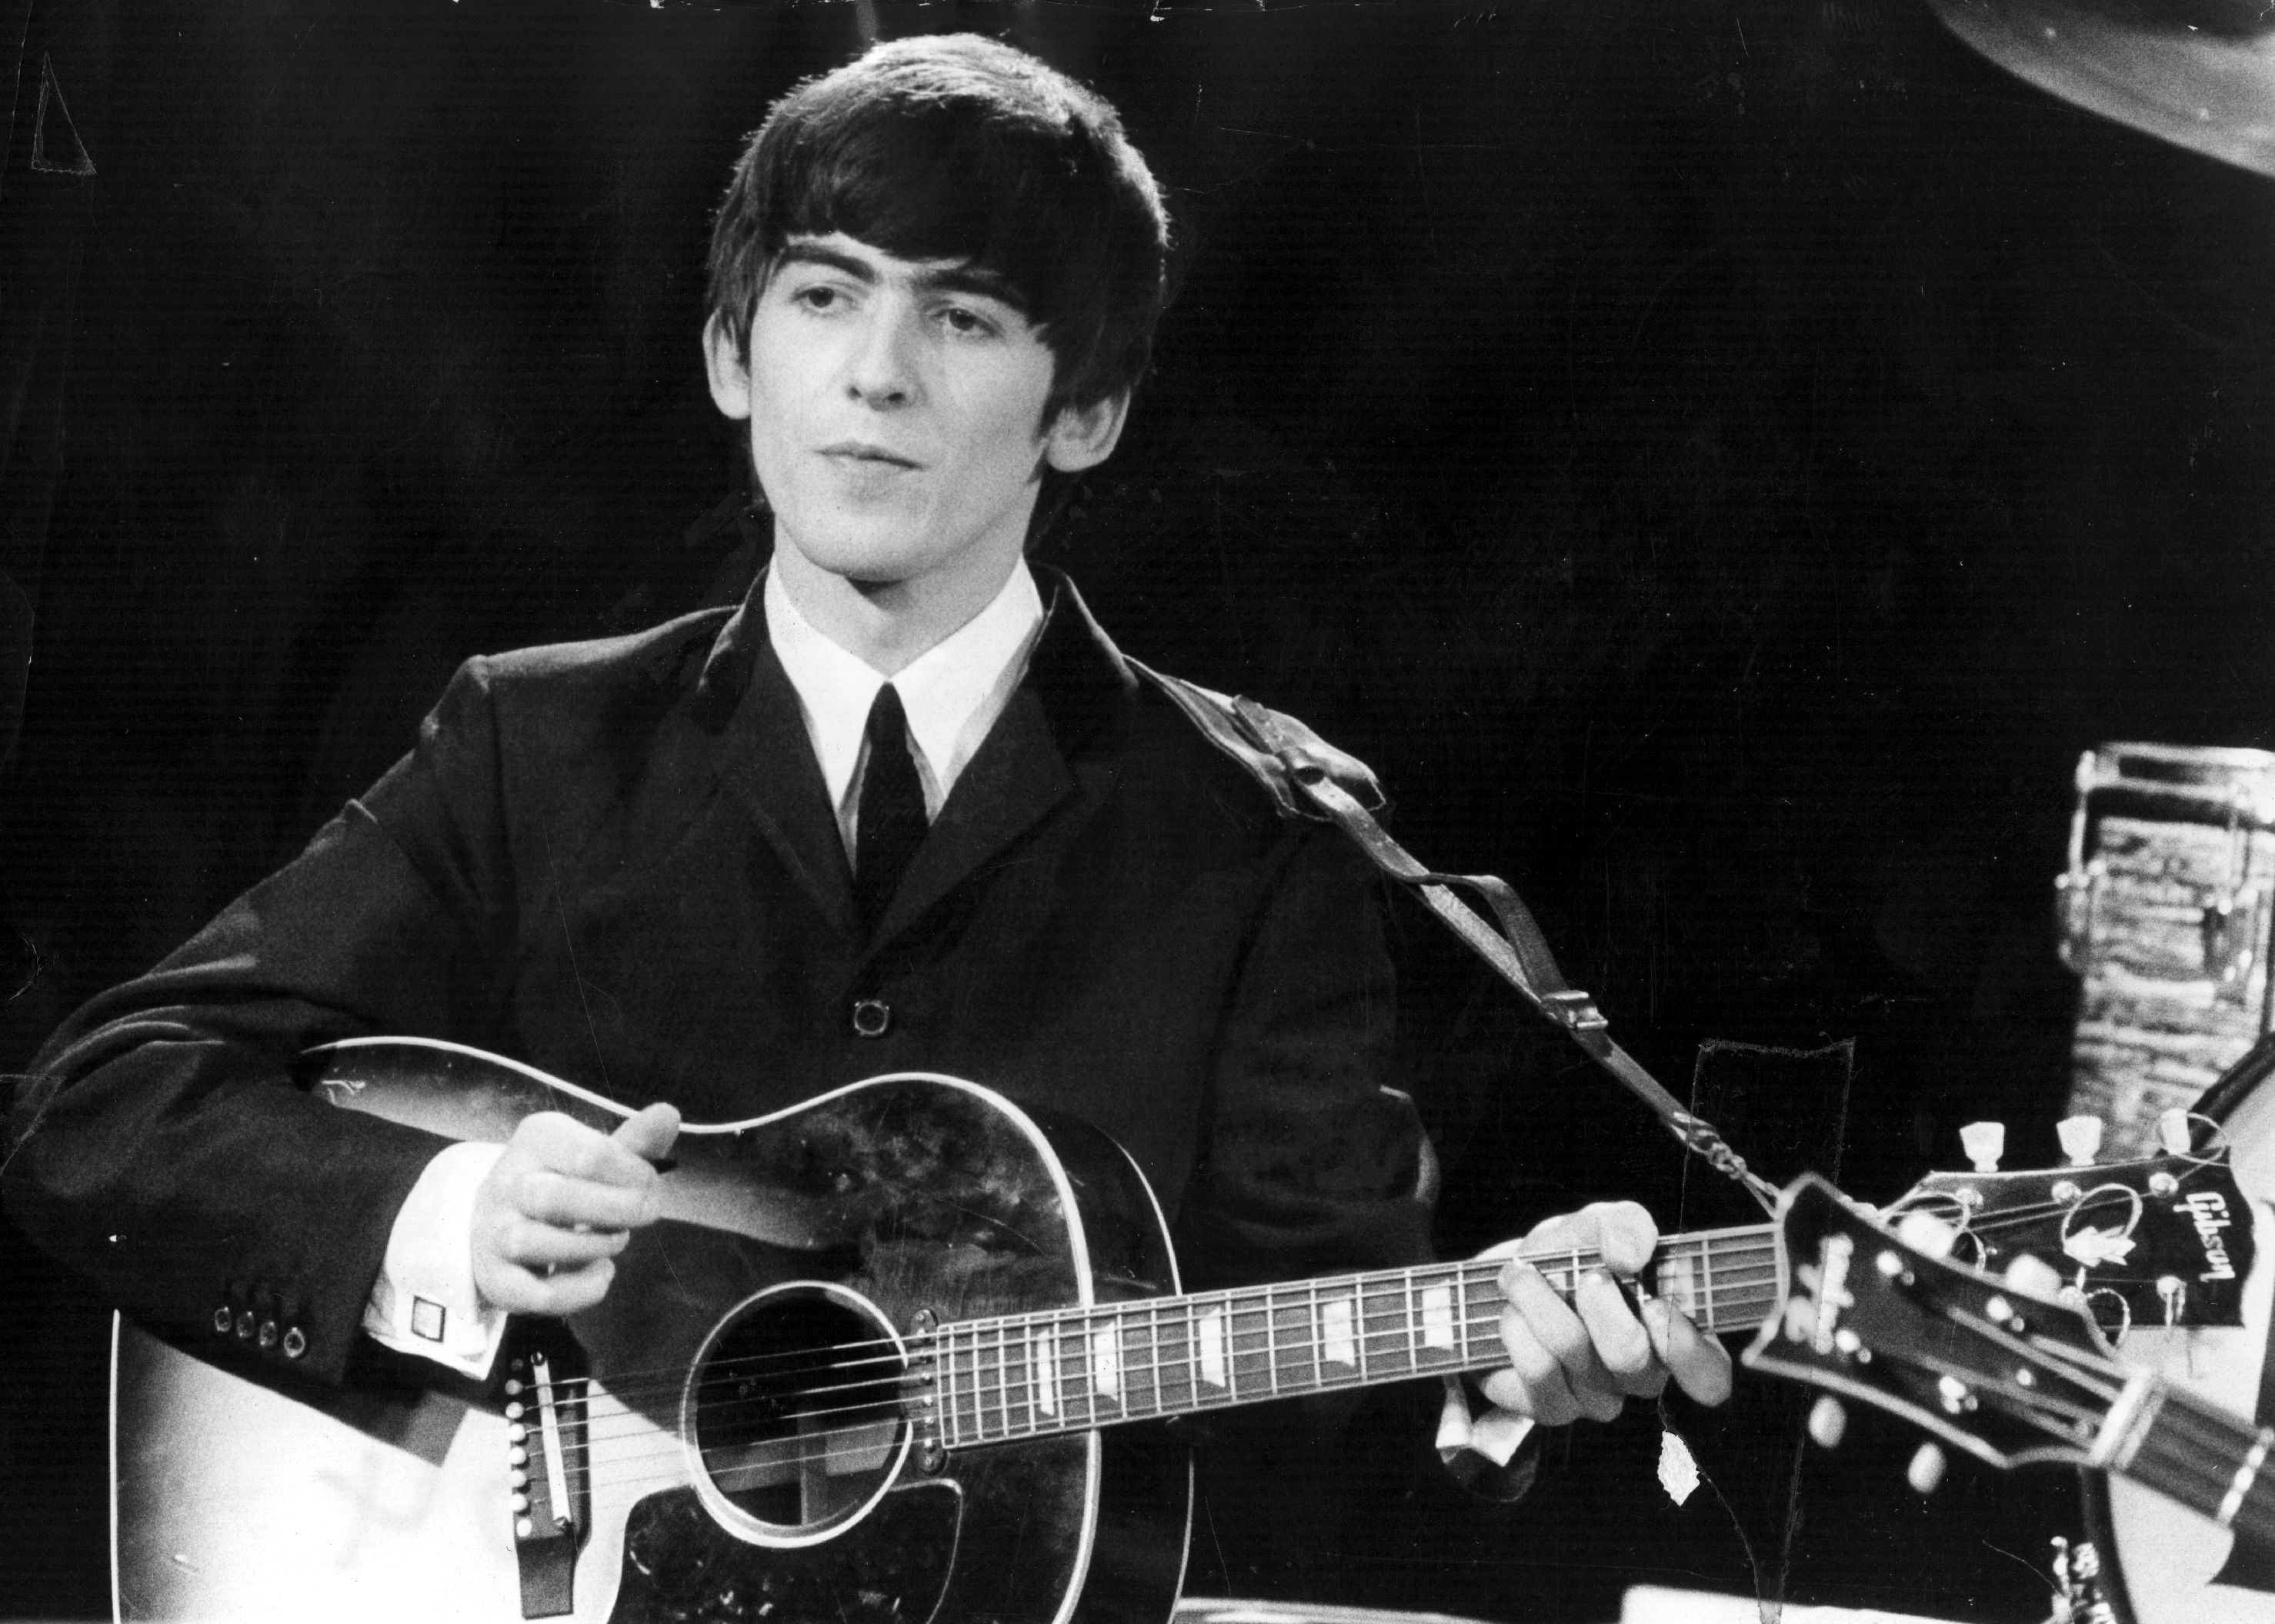 A black and white picture of George Harrison holding a guitar.